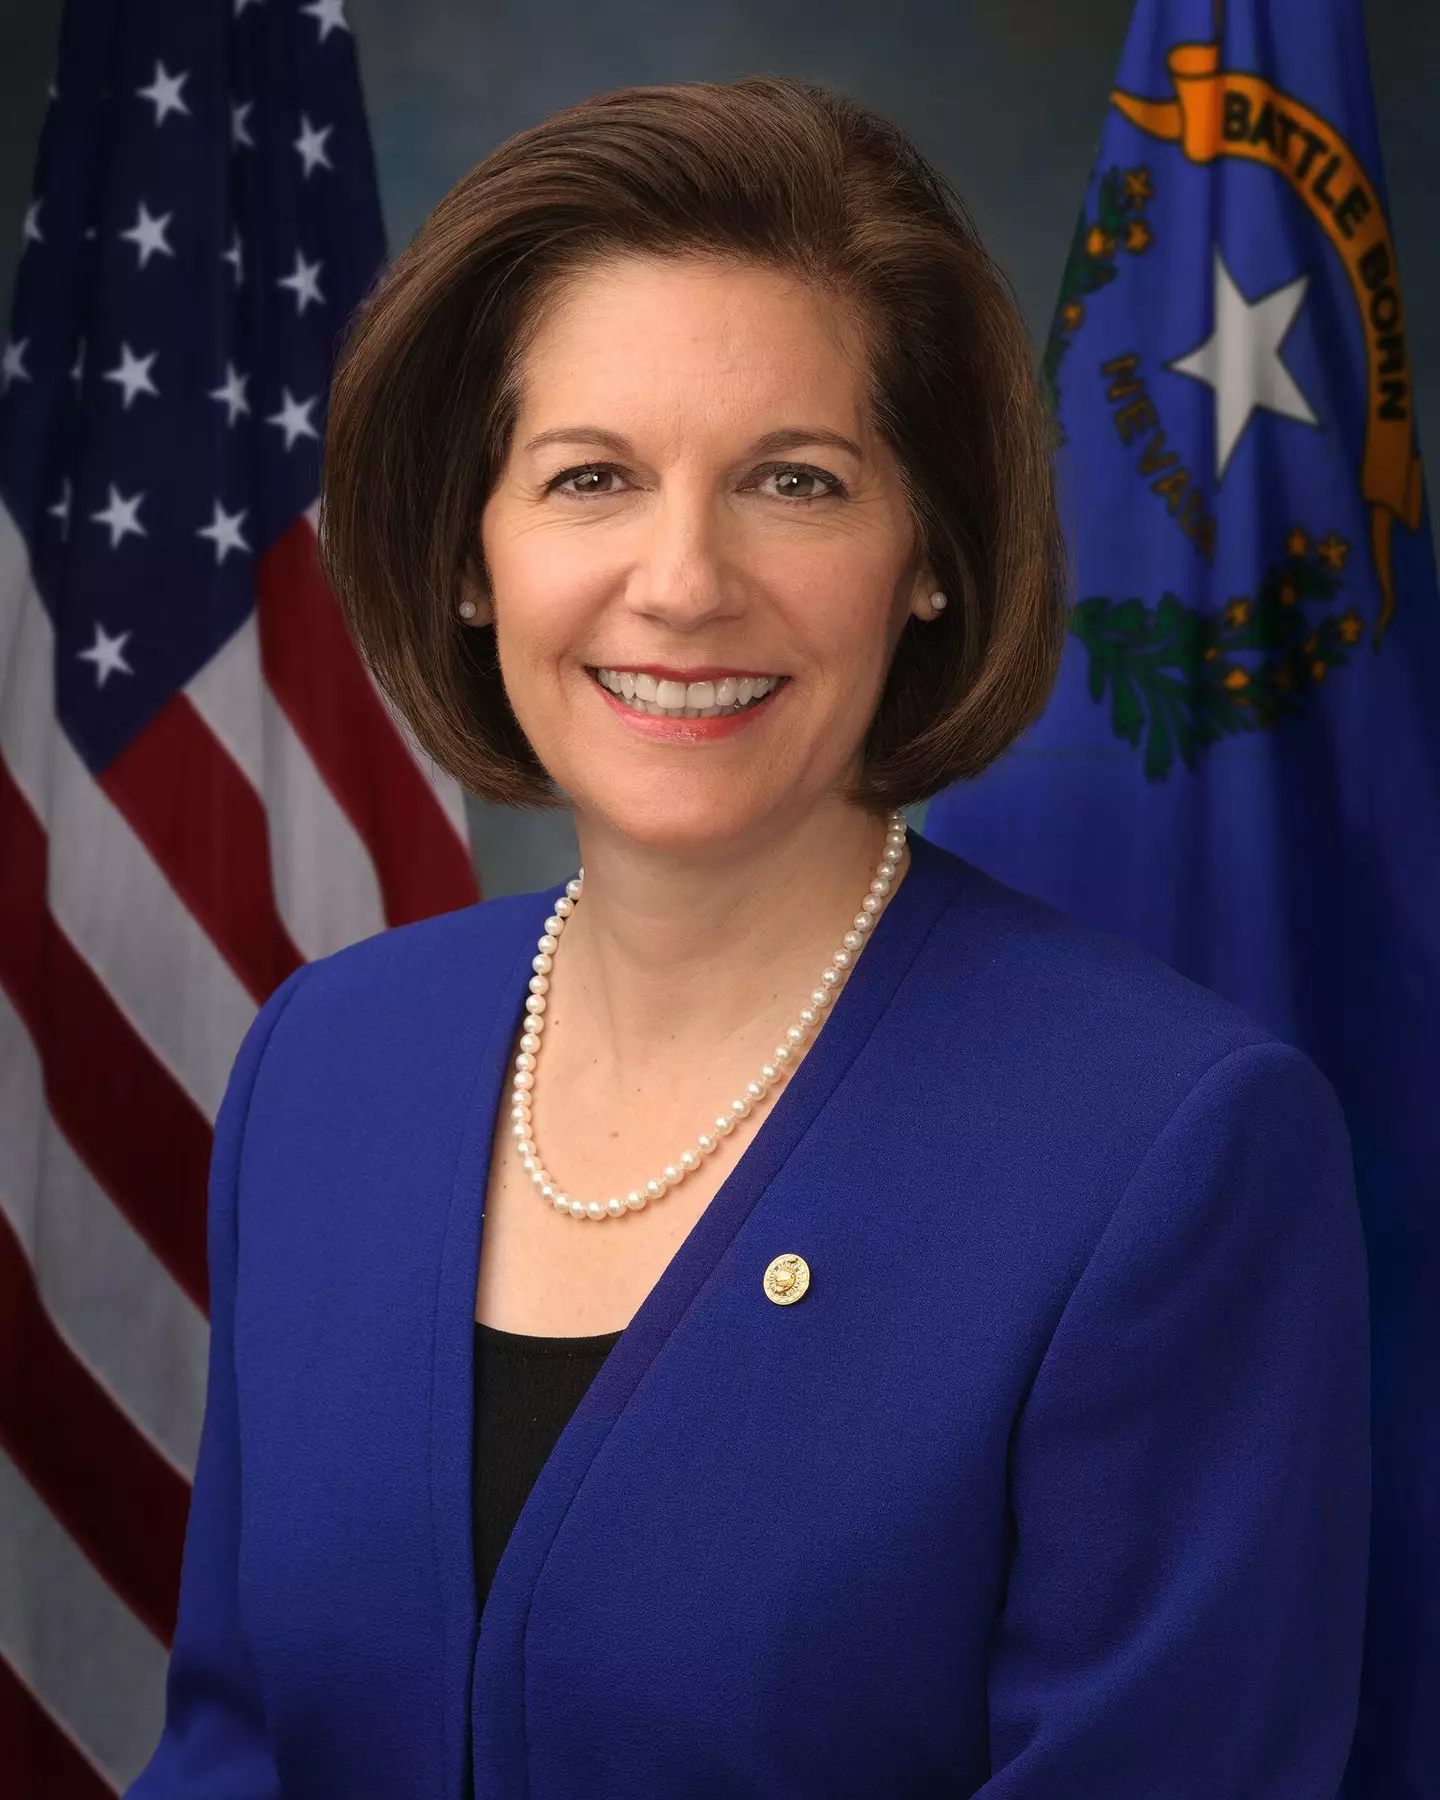 Catherine Cortez Masto is projected to win the key state of Nevada.